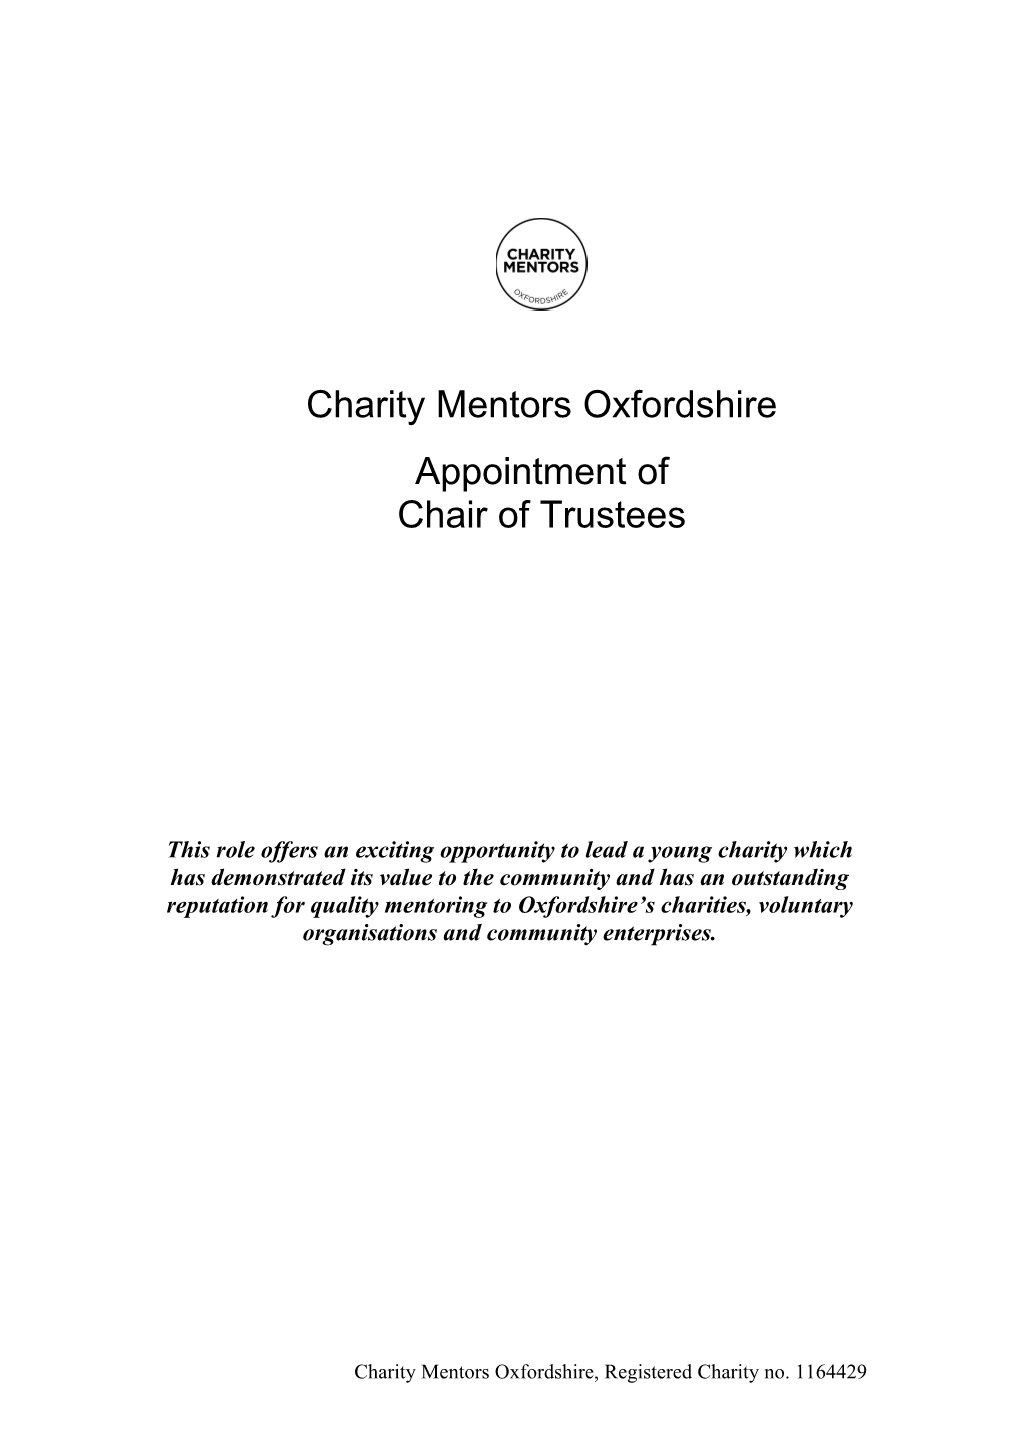 Appointment of Chair of Trustees